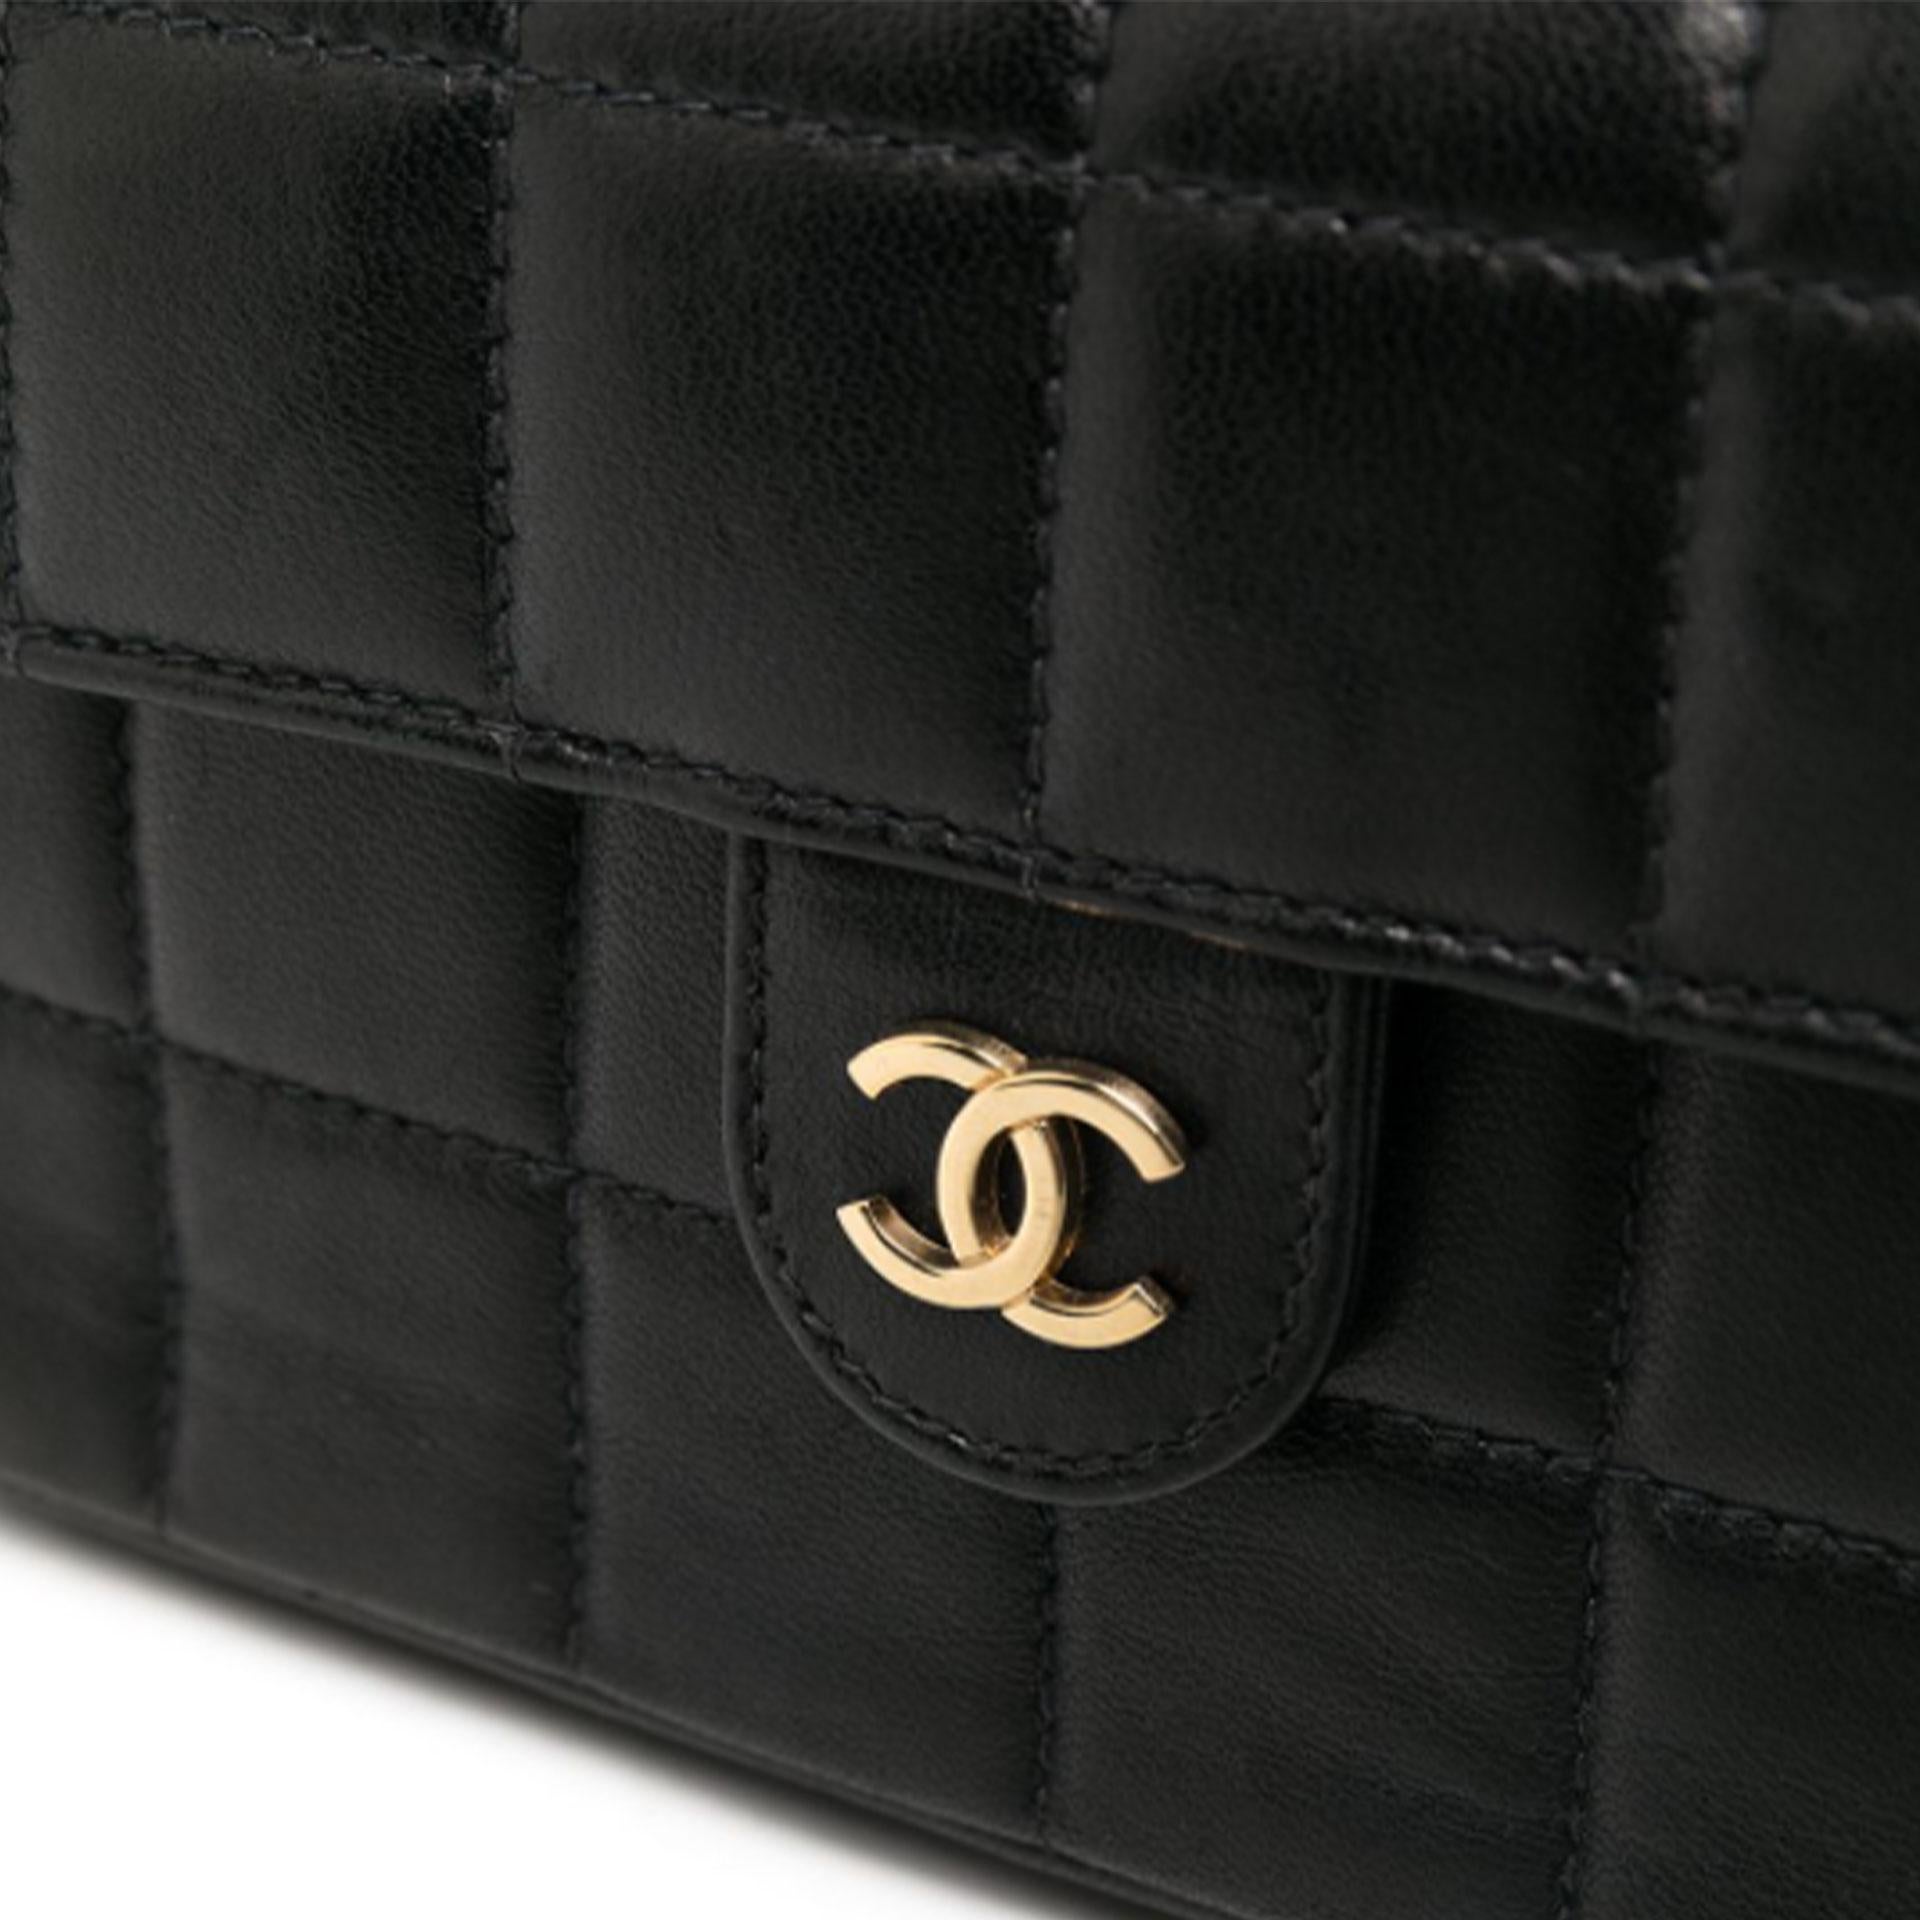 Chanel 2002 Rare Vintage Black Lambskin Waist Belt Bag Fanny Pack In Good Condition For Sale In Miami, FL